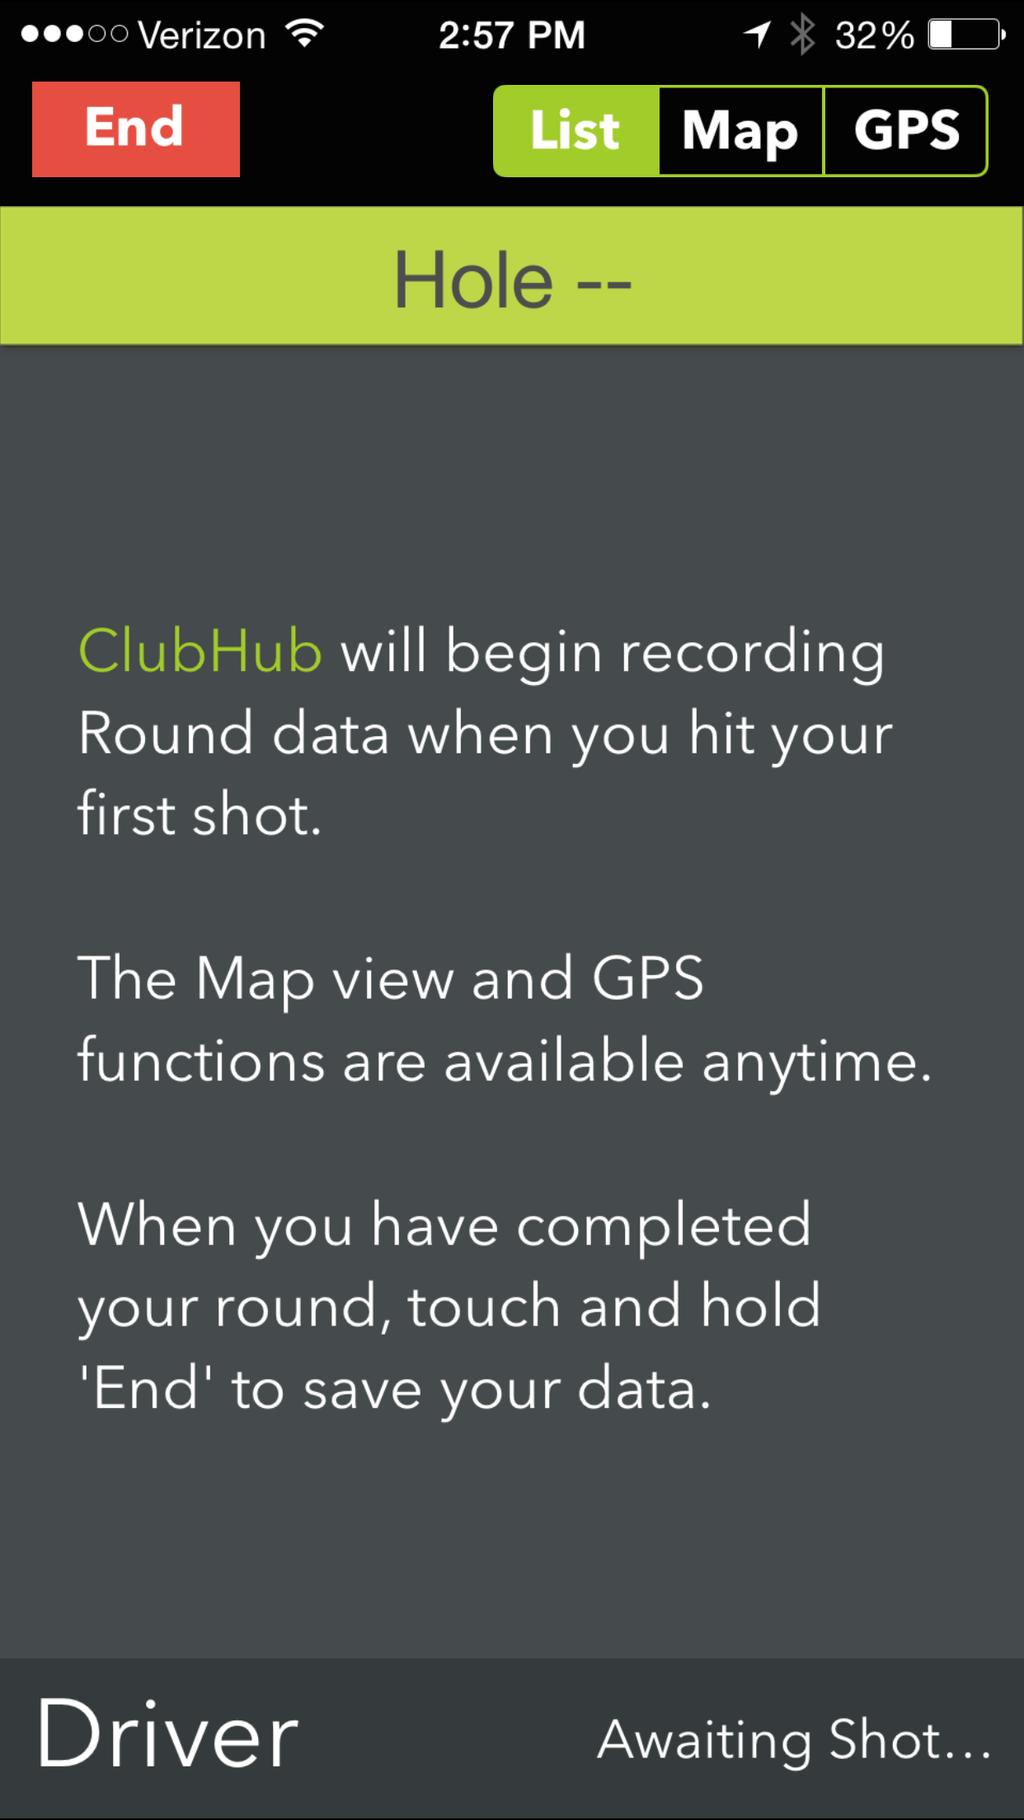 Play Round List View No Shots Long press End (Touch and hold) to close a round. Long press prevents inadvertent ending of the round. Selector to switch between shot List, Map or GPS views.